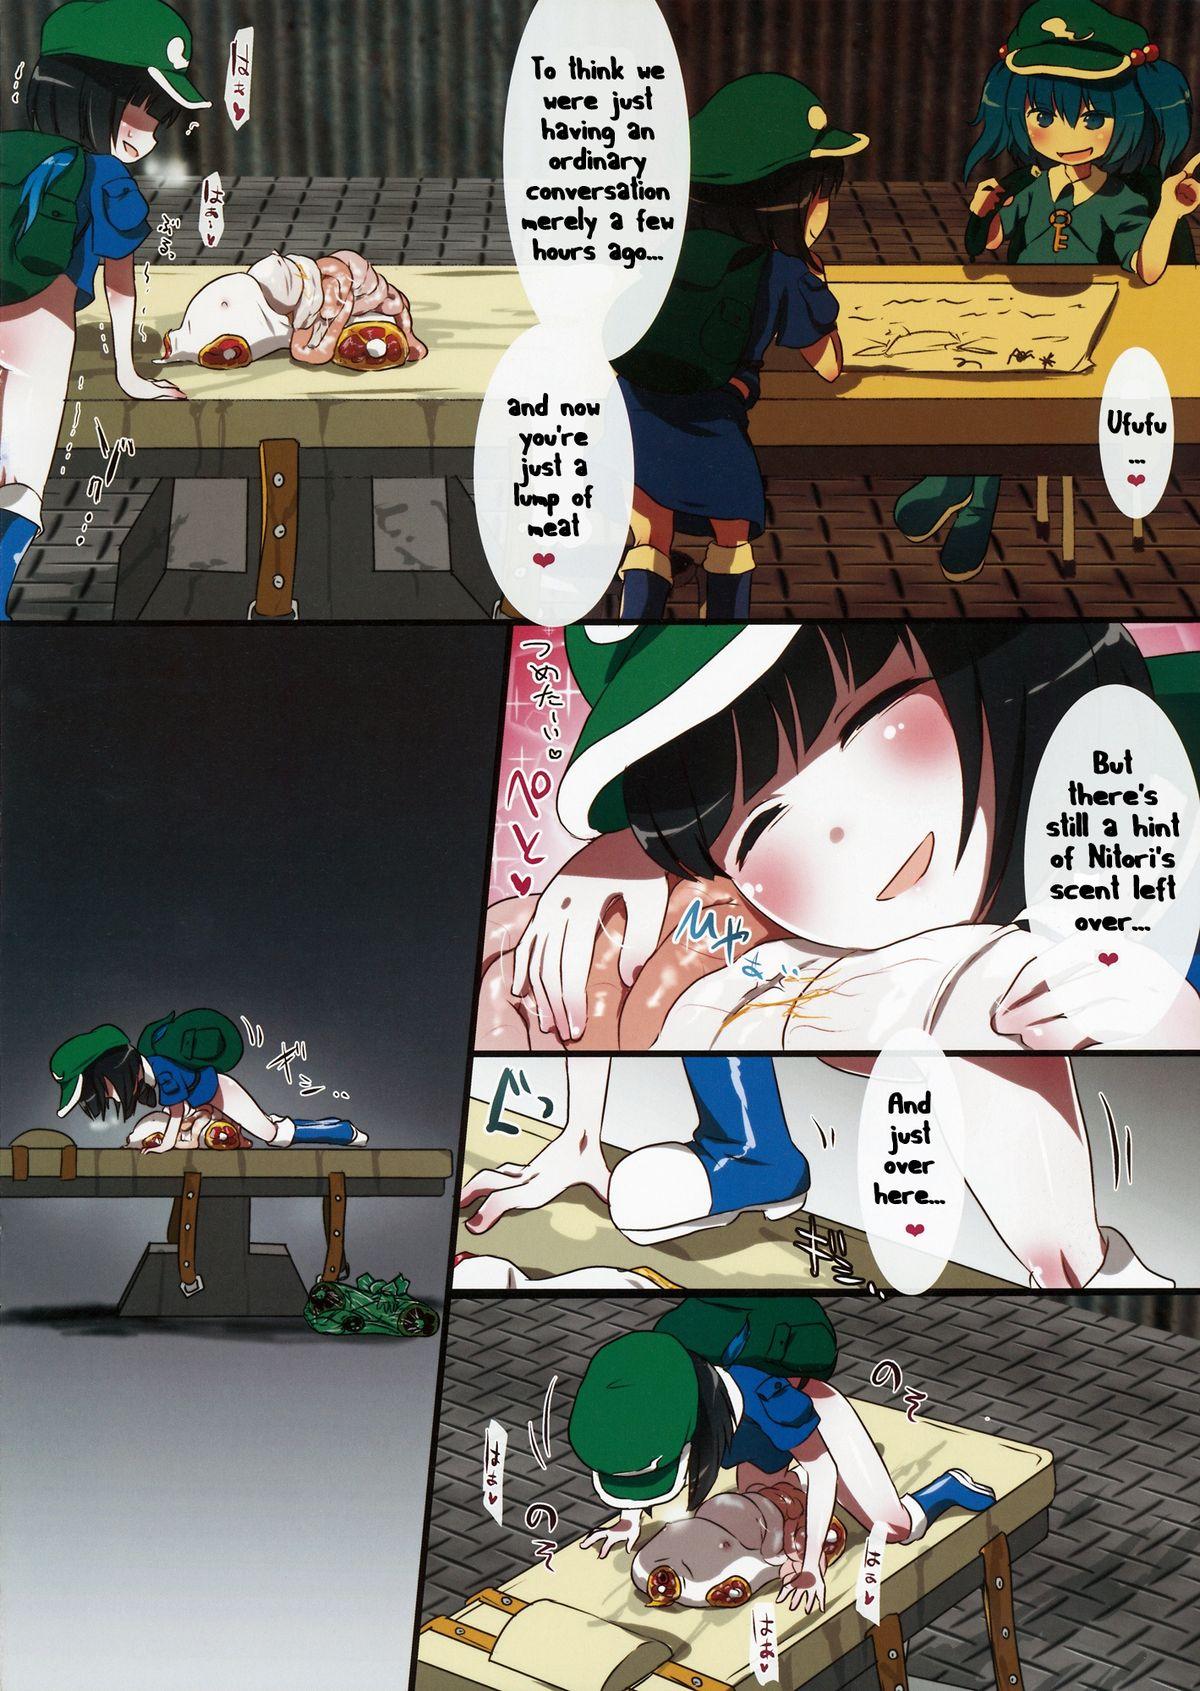 Spying 0210564801 - Touhou project Licking Pussy - Page 10